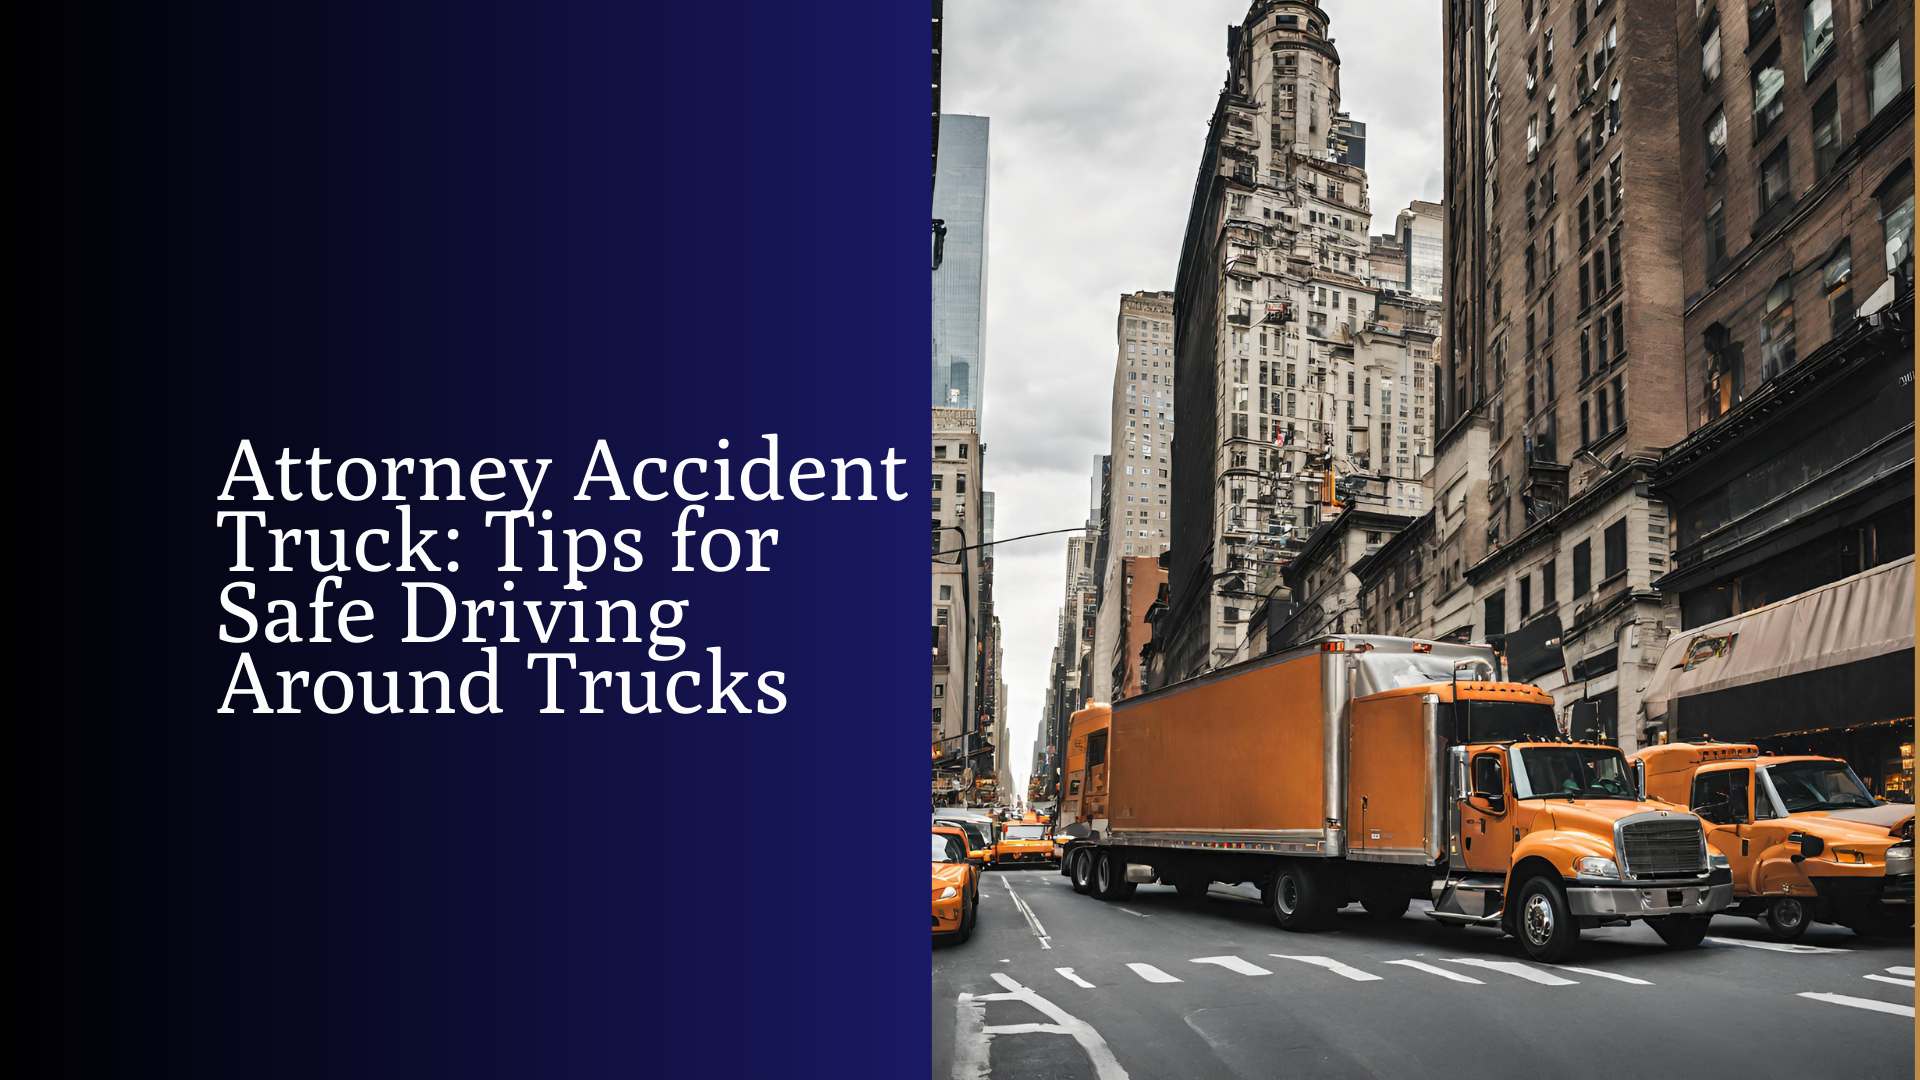 Attorney-Accident-Truck-Tips-for-Safe-Driving-Around-Trucks